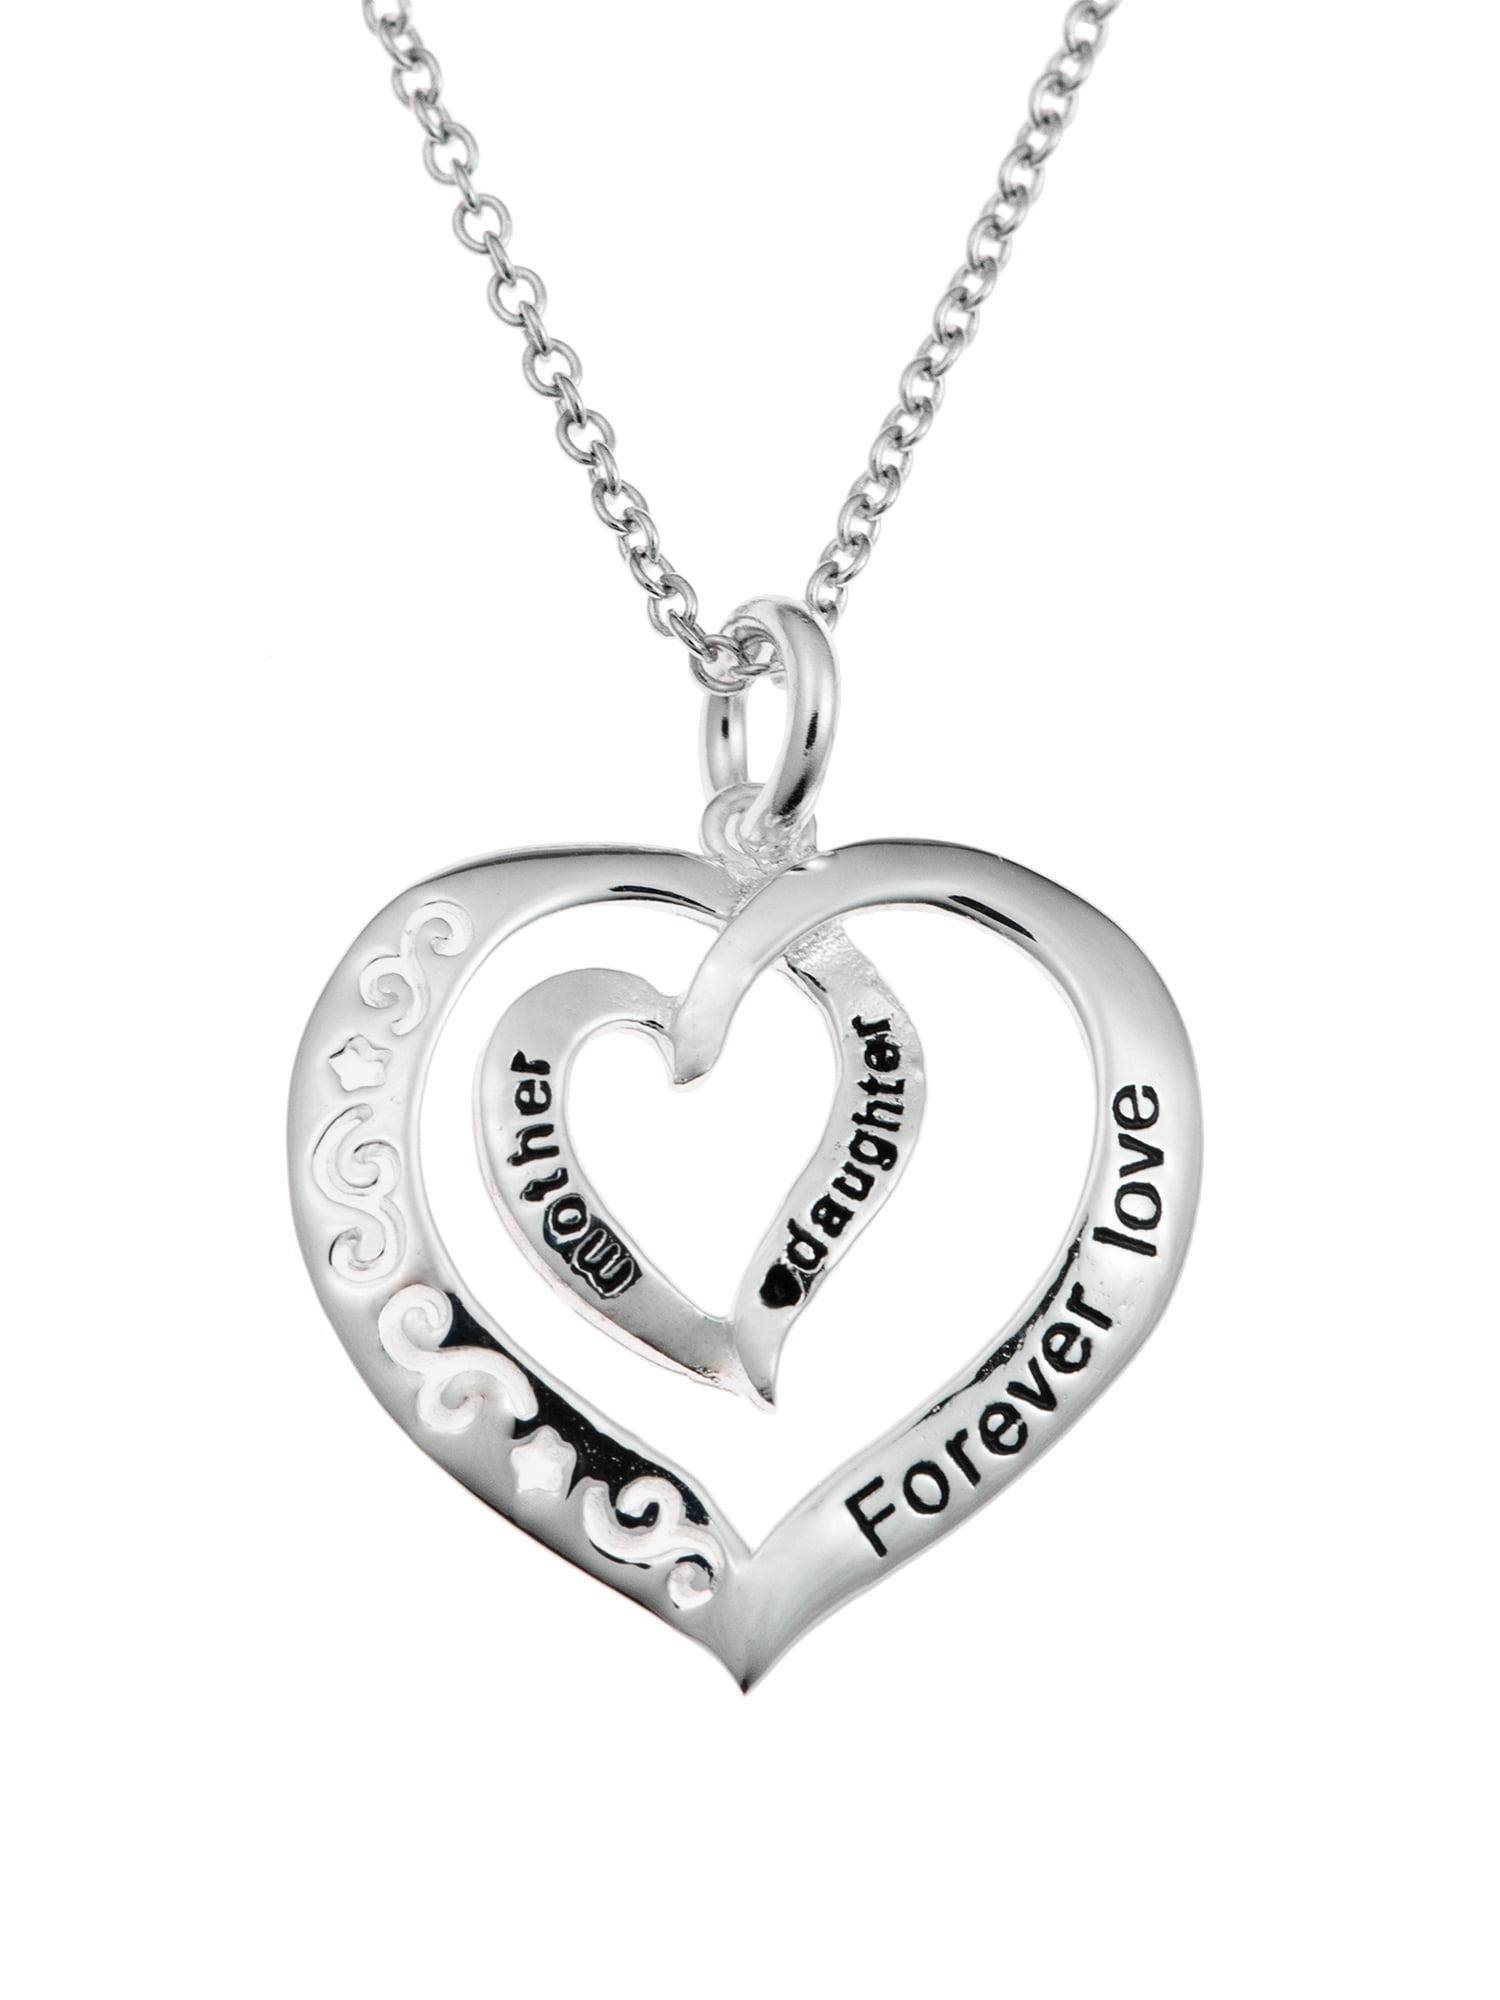 Love Birds Kissing in Heart 925 Sterling Silver Charm Pendant Necklace 16" 18" 